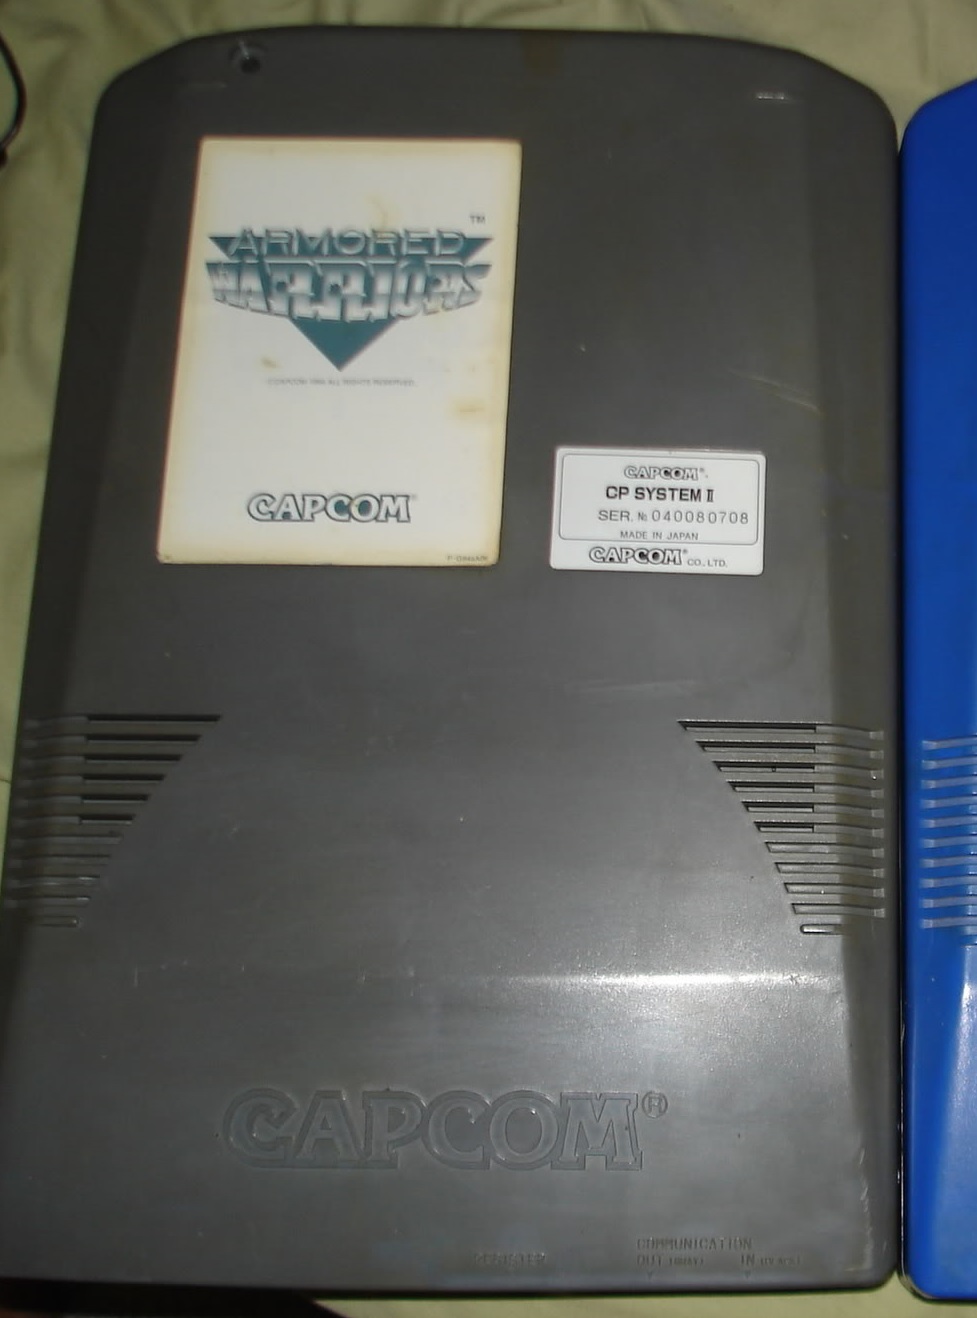 Cps2 armored warriors english label.jpg